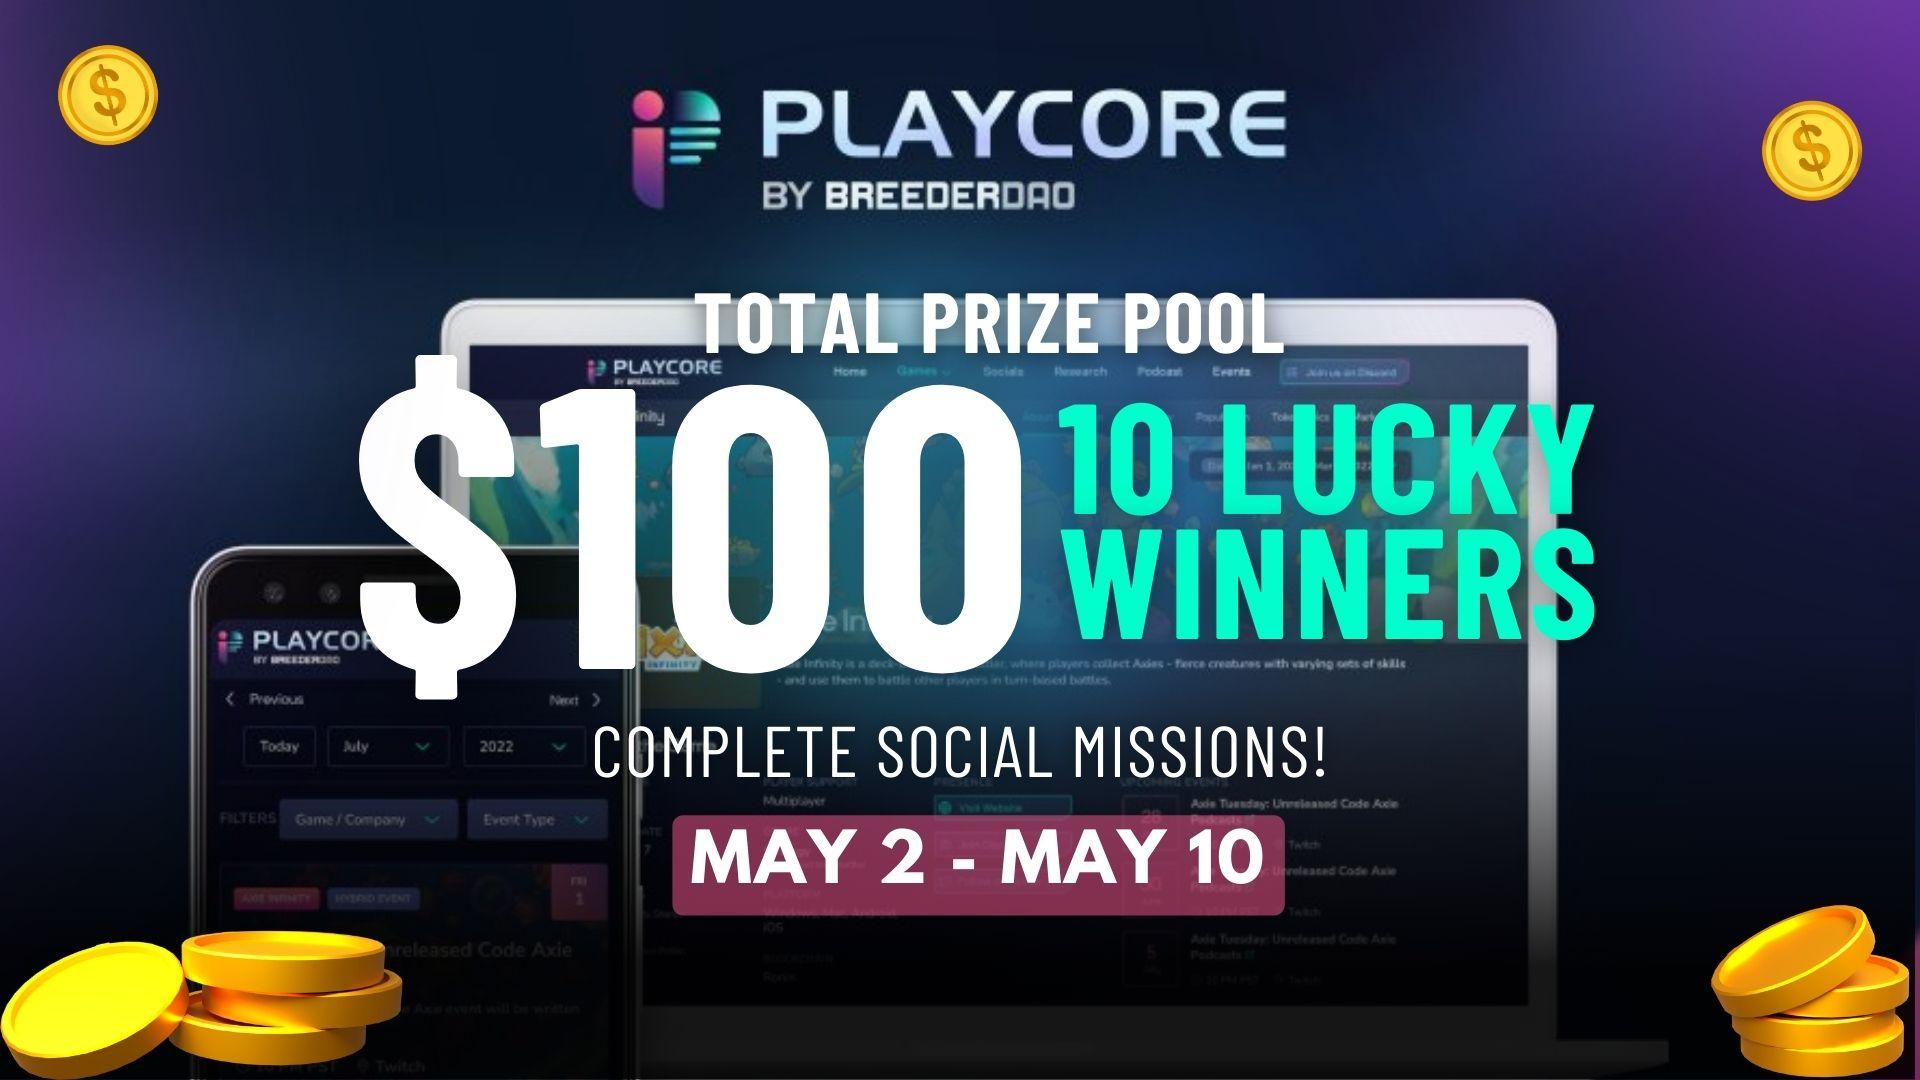 PLAYCORE $100 PRIZE POOL QUEST💰